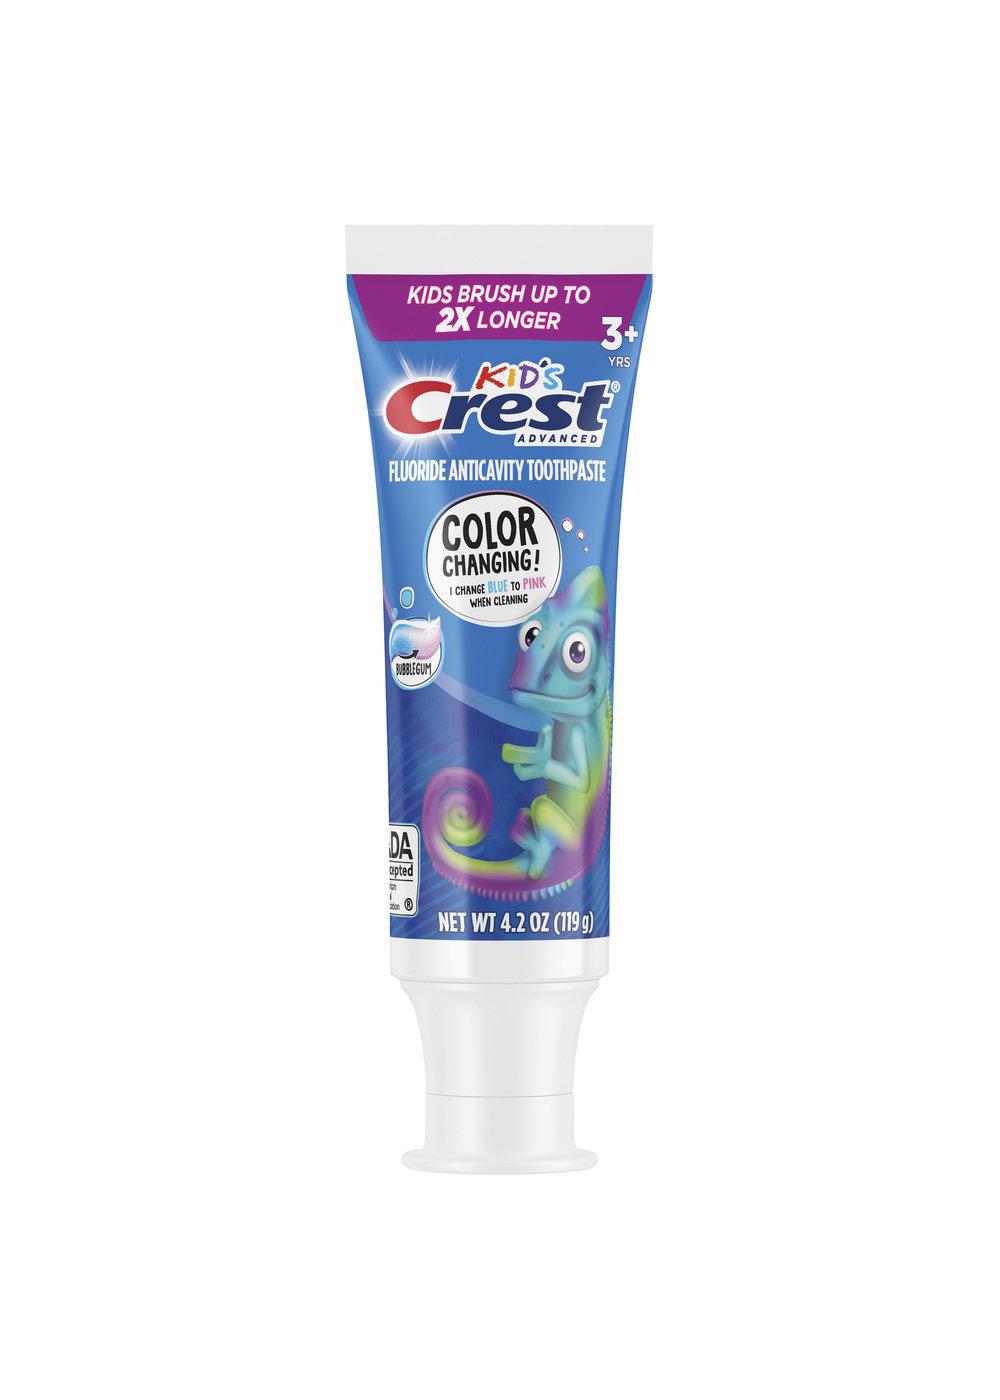 Crest Kid's Advanced Color Changing Toothpaste - Bubblegum; image 2 of 6